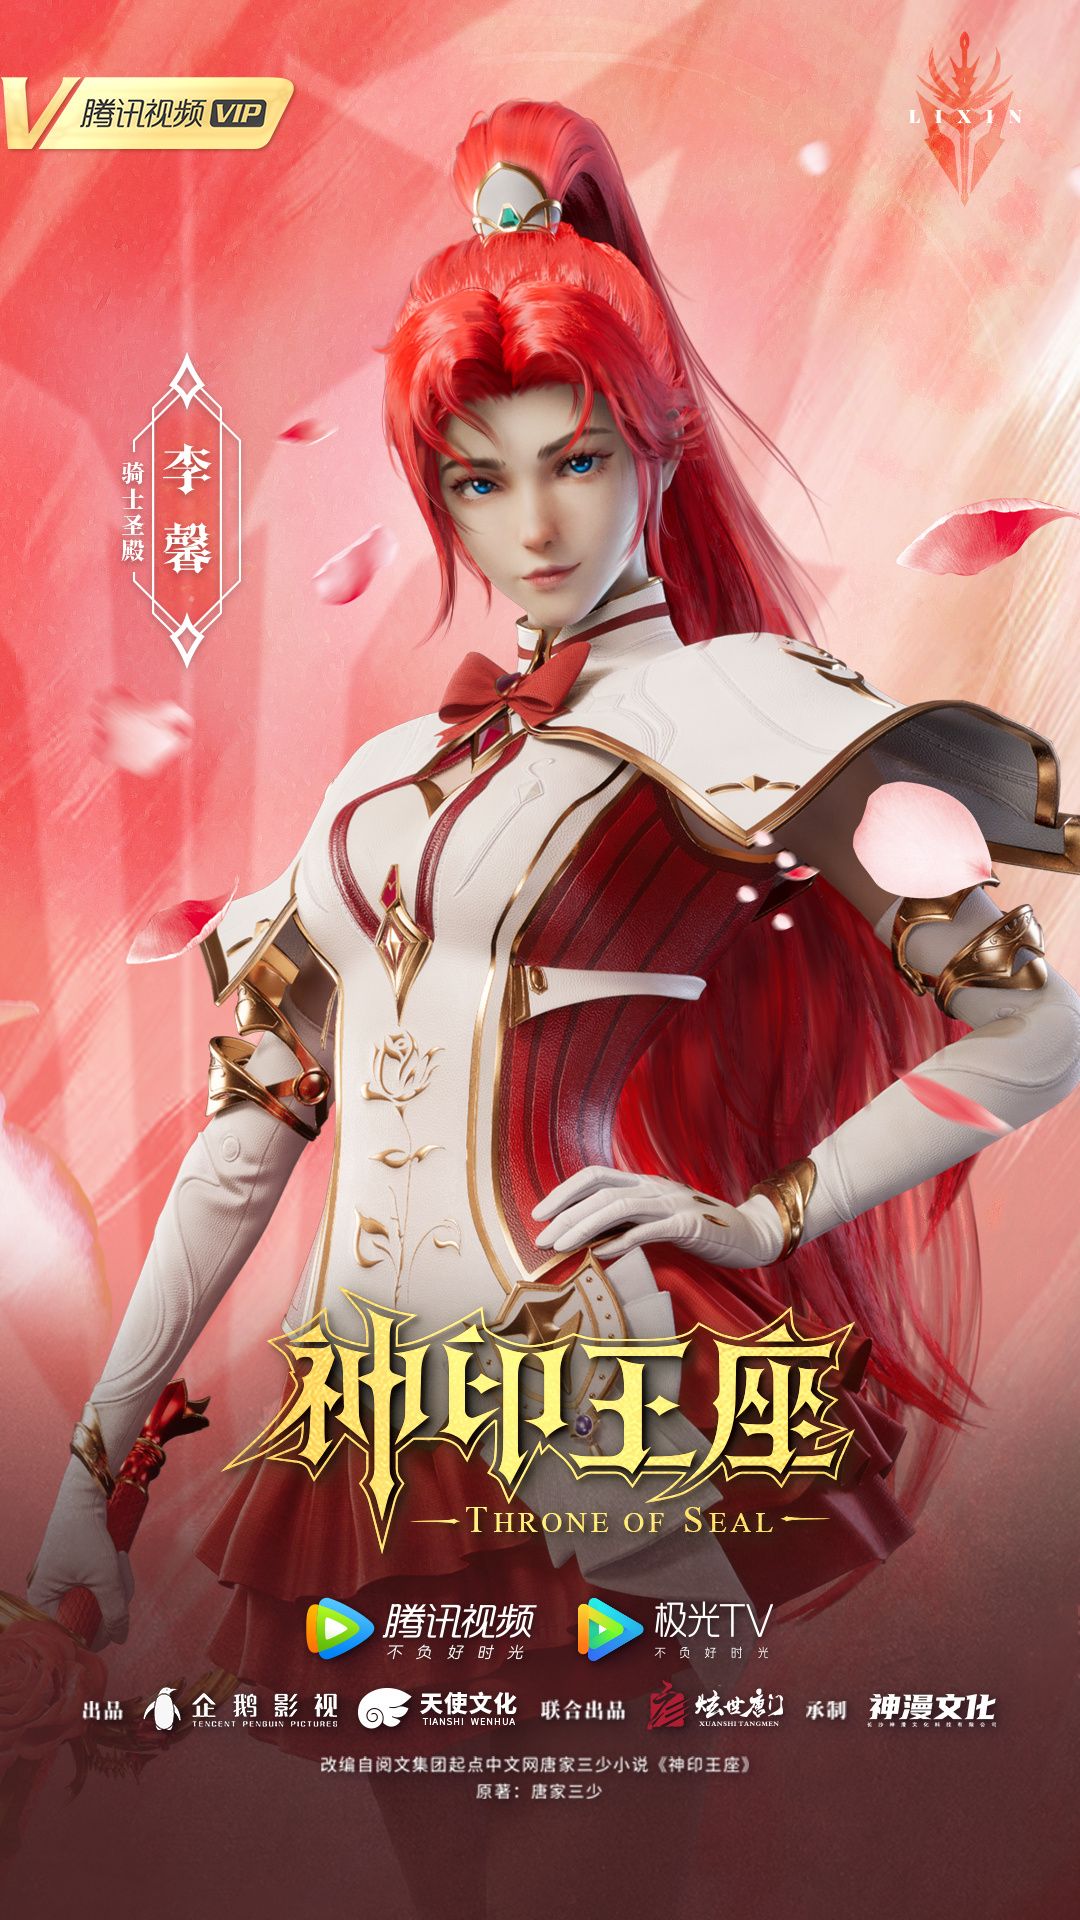 Throne Of Seal Donghua Unveiled The Character Poster For Li Xin. Chinese Anime Online. Warrior woman, Anime, Penguin picture